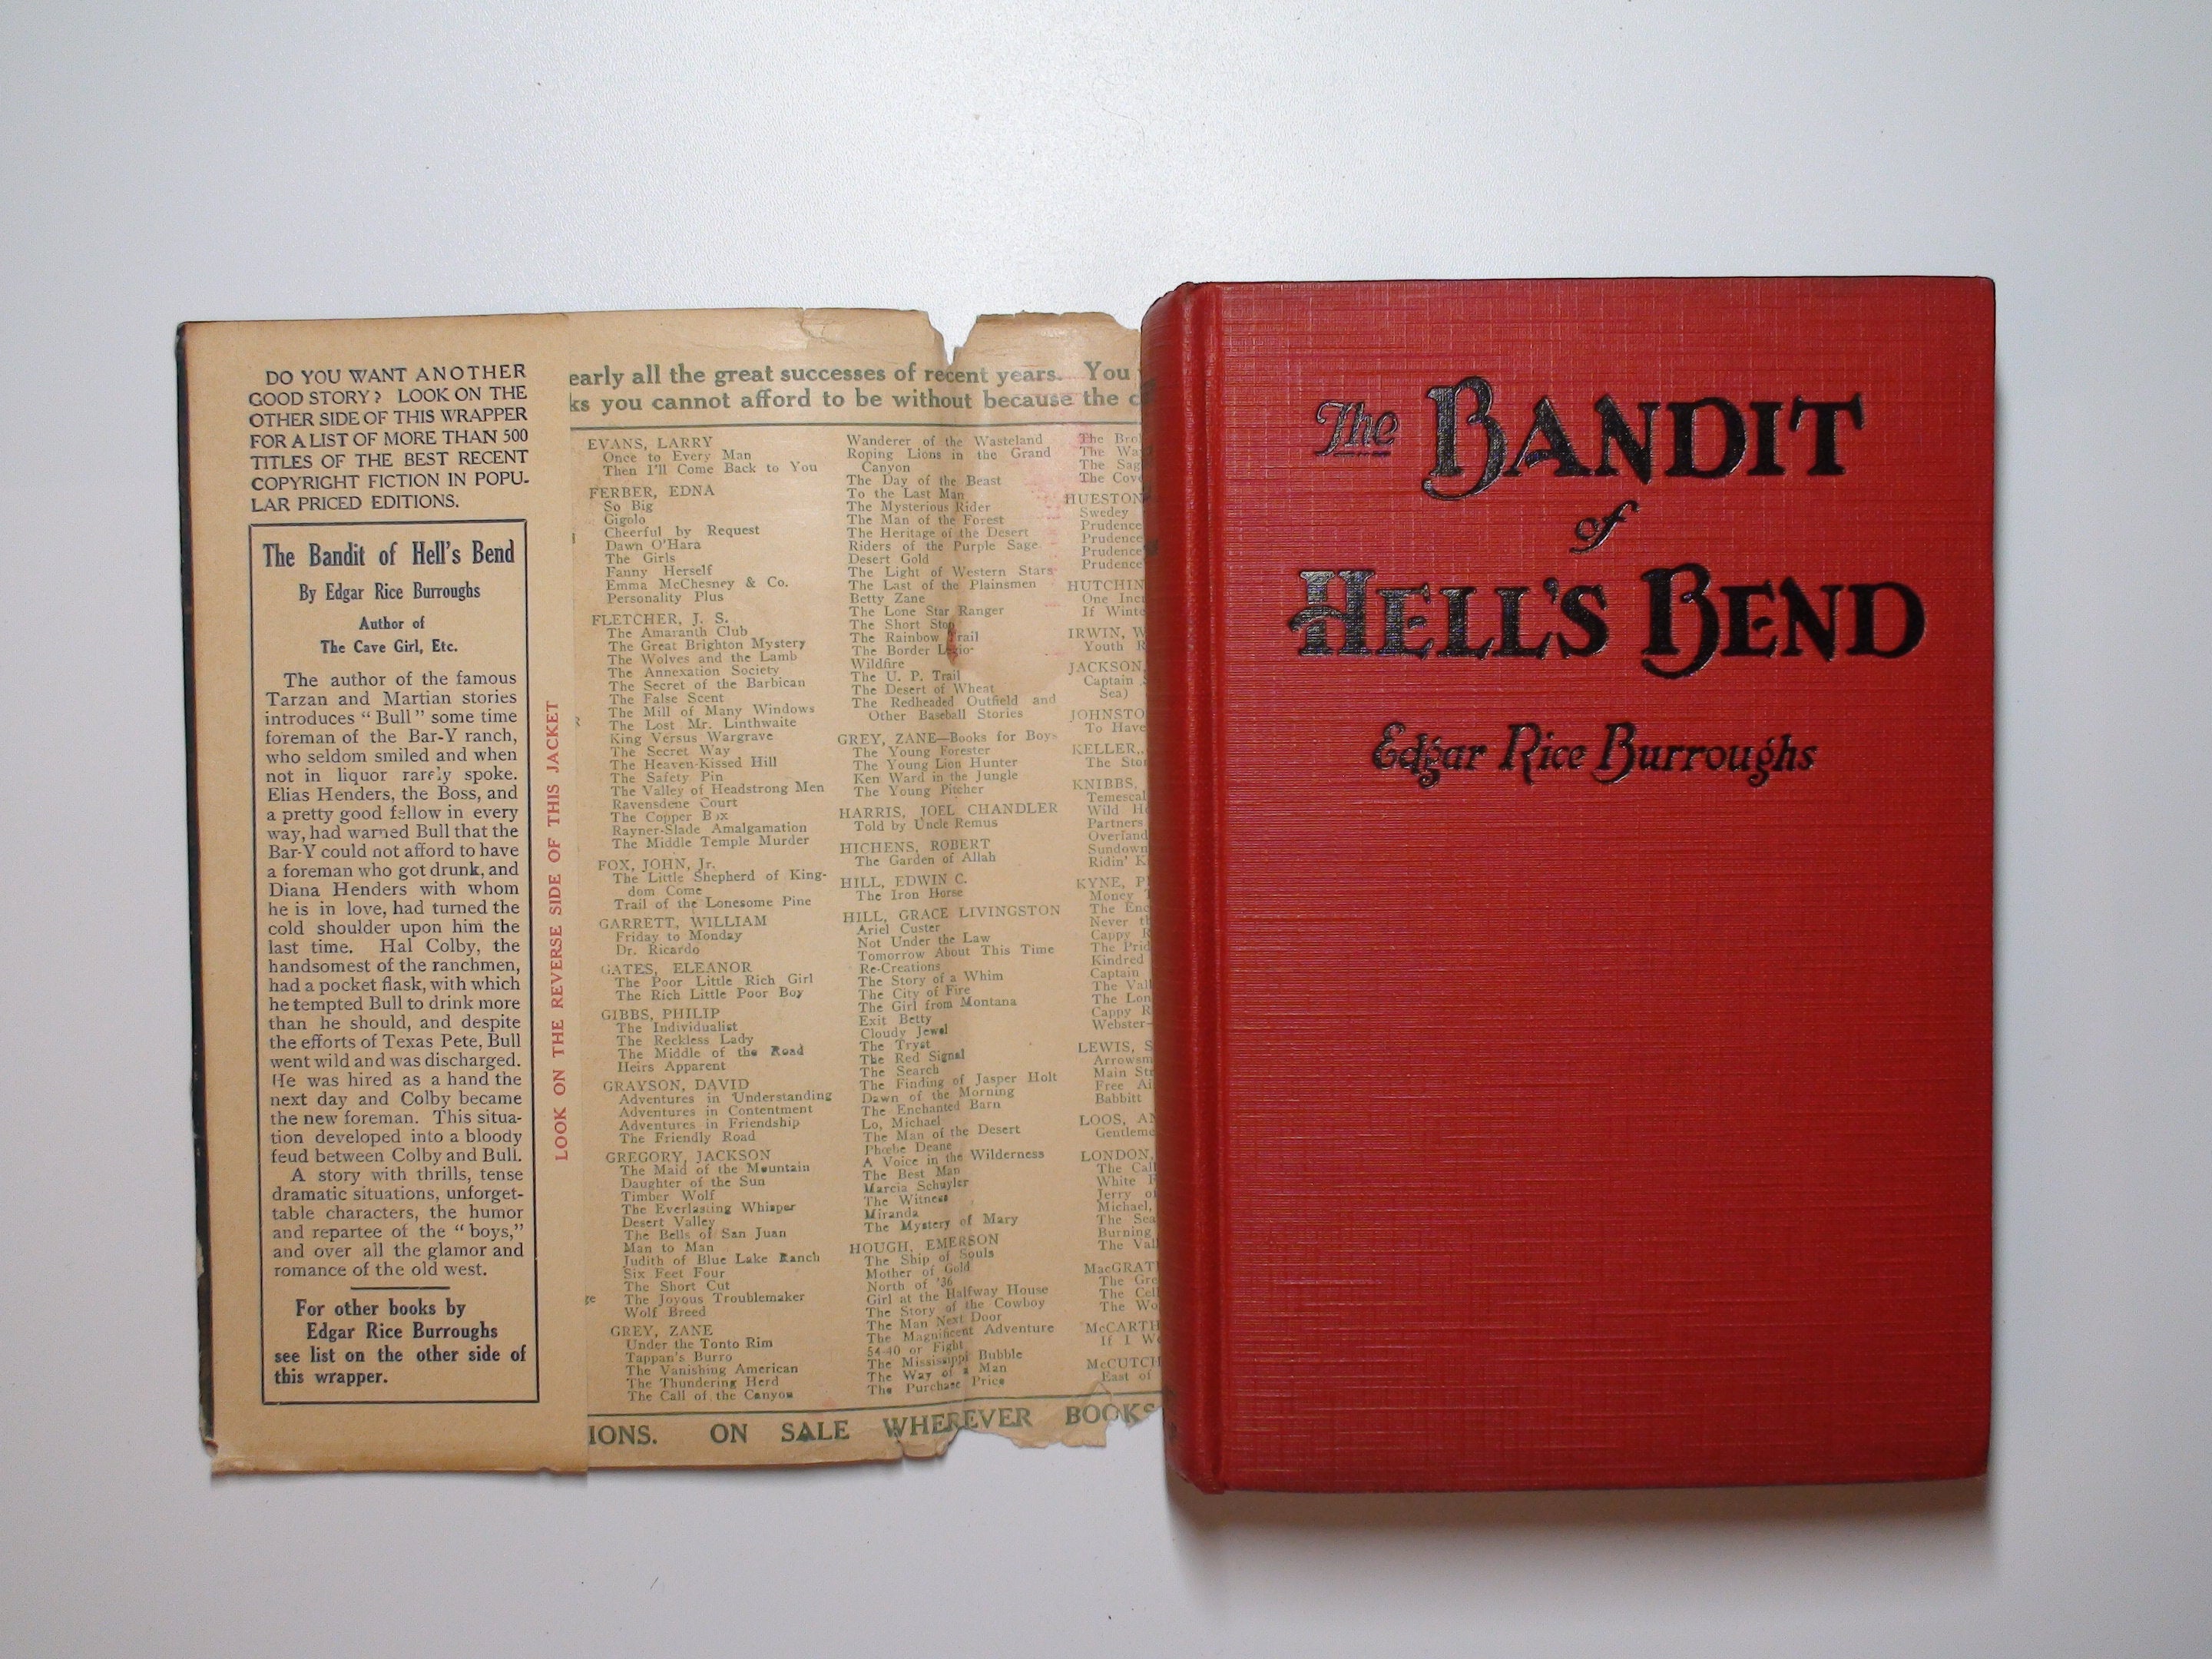 The Bandit of Hell's Bend, Edgar Rice Burroughs, w DJ, Grosset and Dunlap, 1925